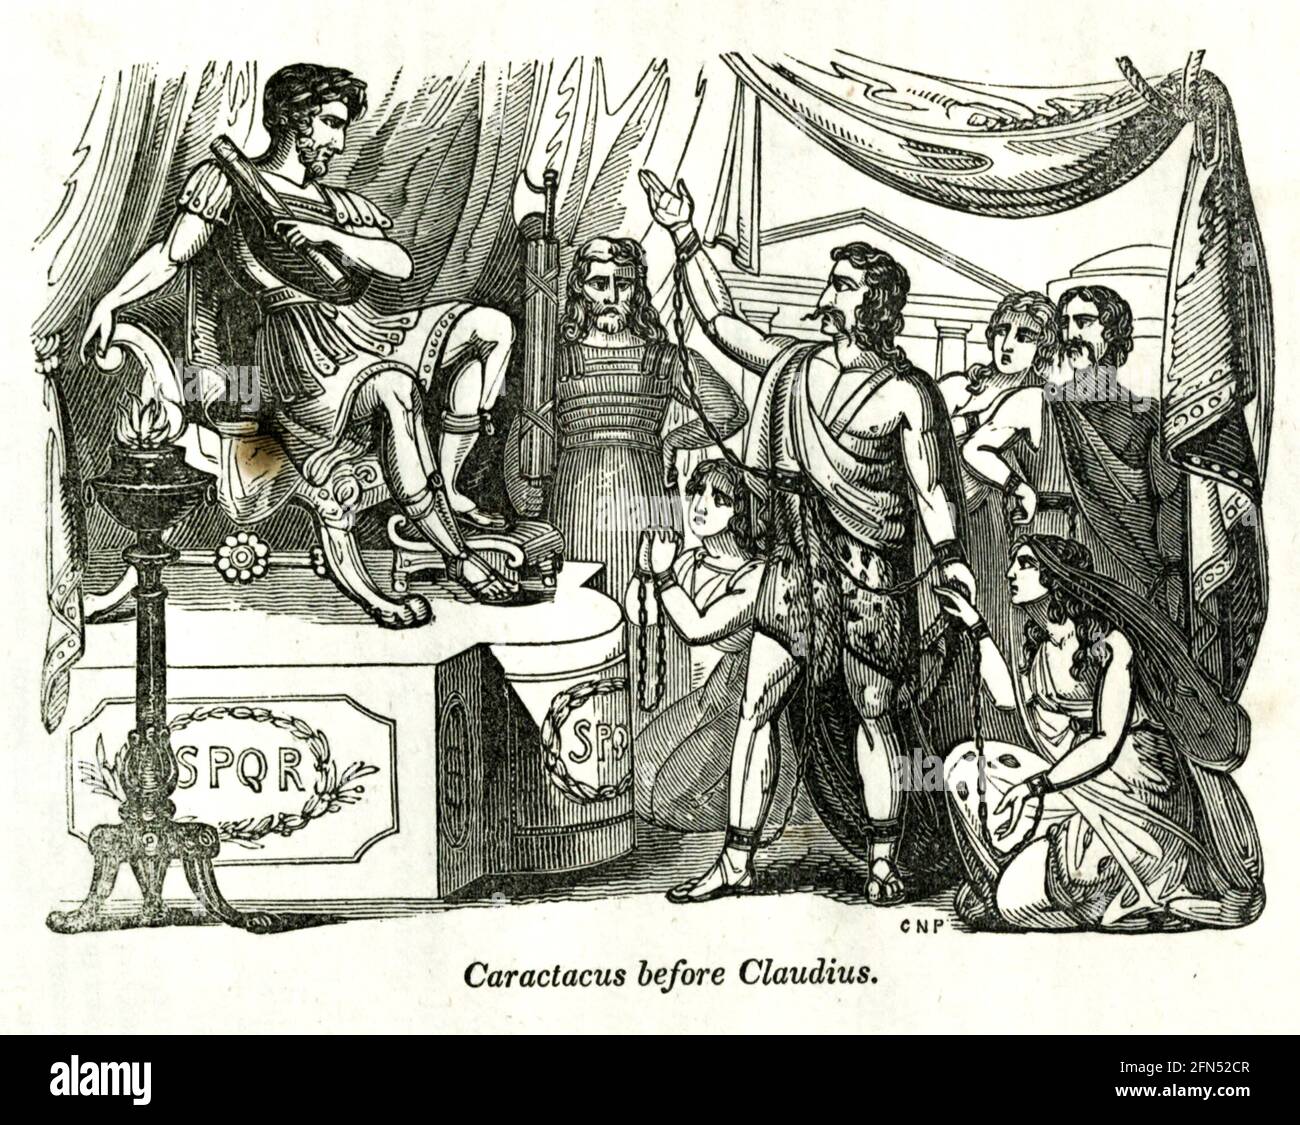 Caractacus before Claudius [Caractacus was a 1st-century AD British chieftain of the Catuvellauni tribe, who resisted the Roman conquest of Britain]. from the book History of England : with separate historical sketches of Scotland, Wales, and Ireland; from the invasion of Julius Cæsar until the accession of Queen Victoria to the British throne. By Russell, John, A. M., Published in Philadelphia by Hogan & Thompso in 1844 Stock Photo